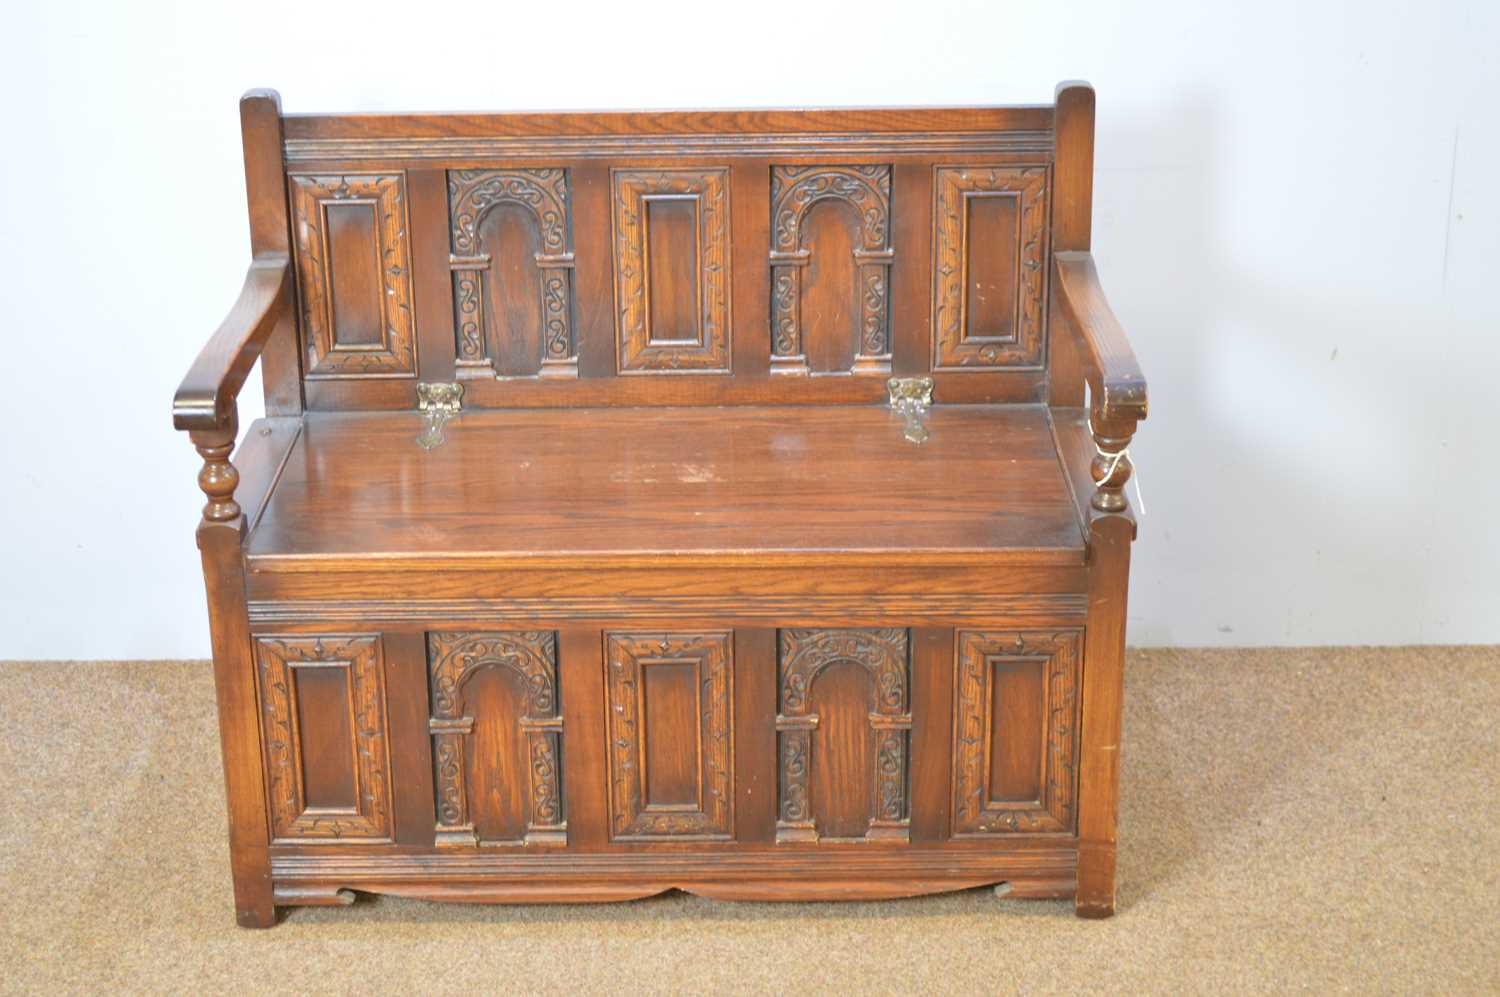 Lot 476 - Old Charm oak hall seat in 17th C style.